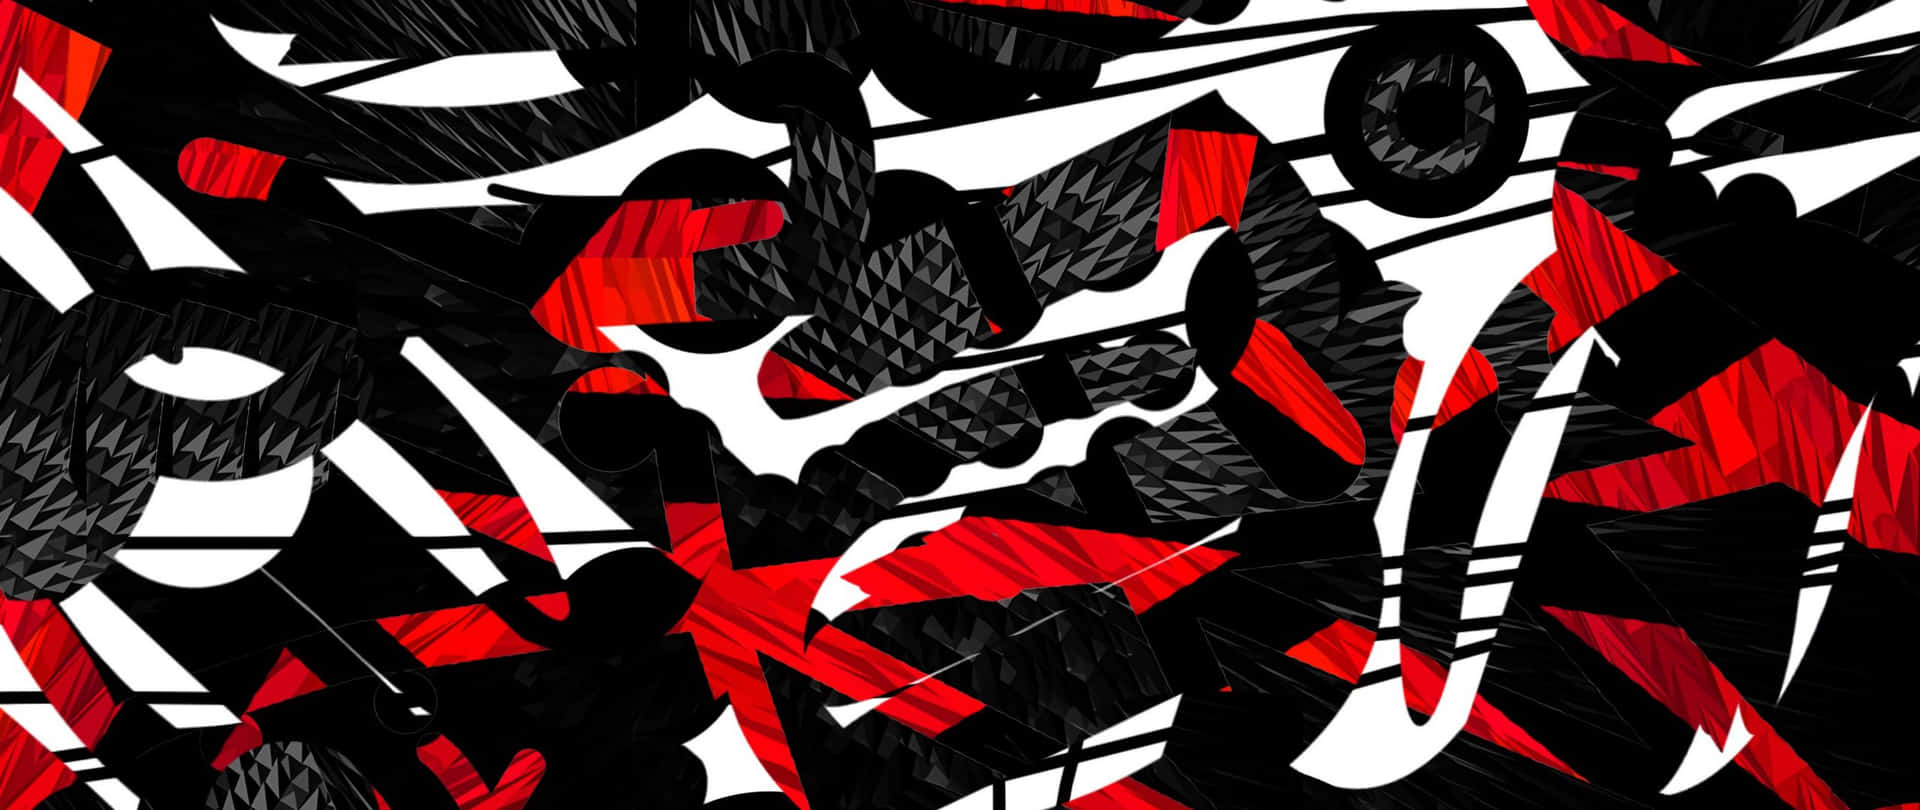 Energetic Red White And Black Abstract Art Wallpaper